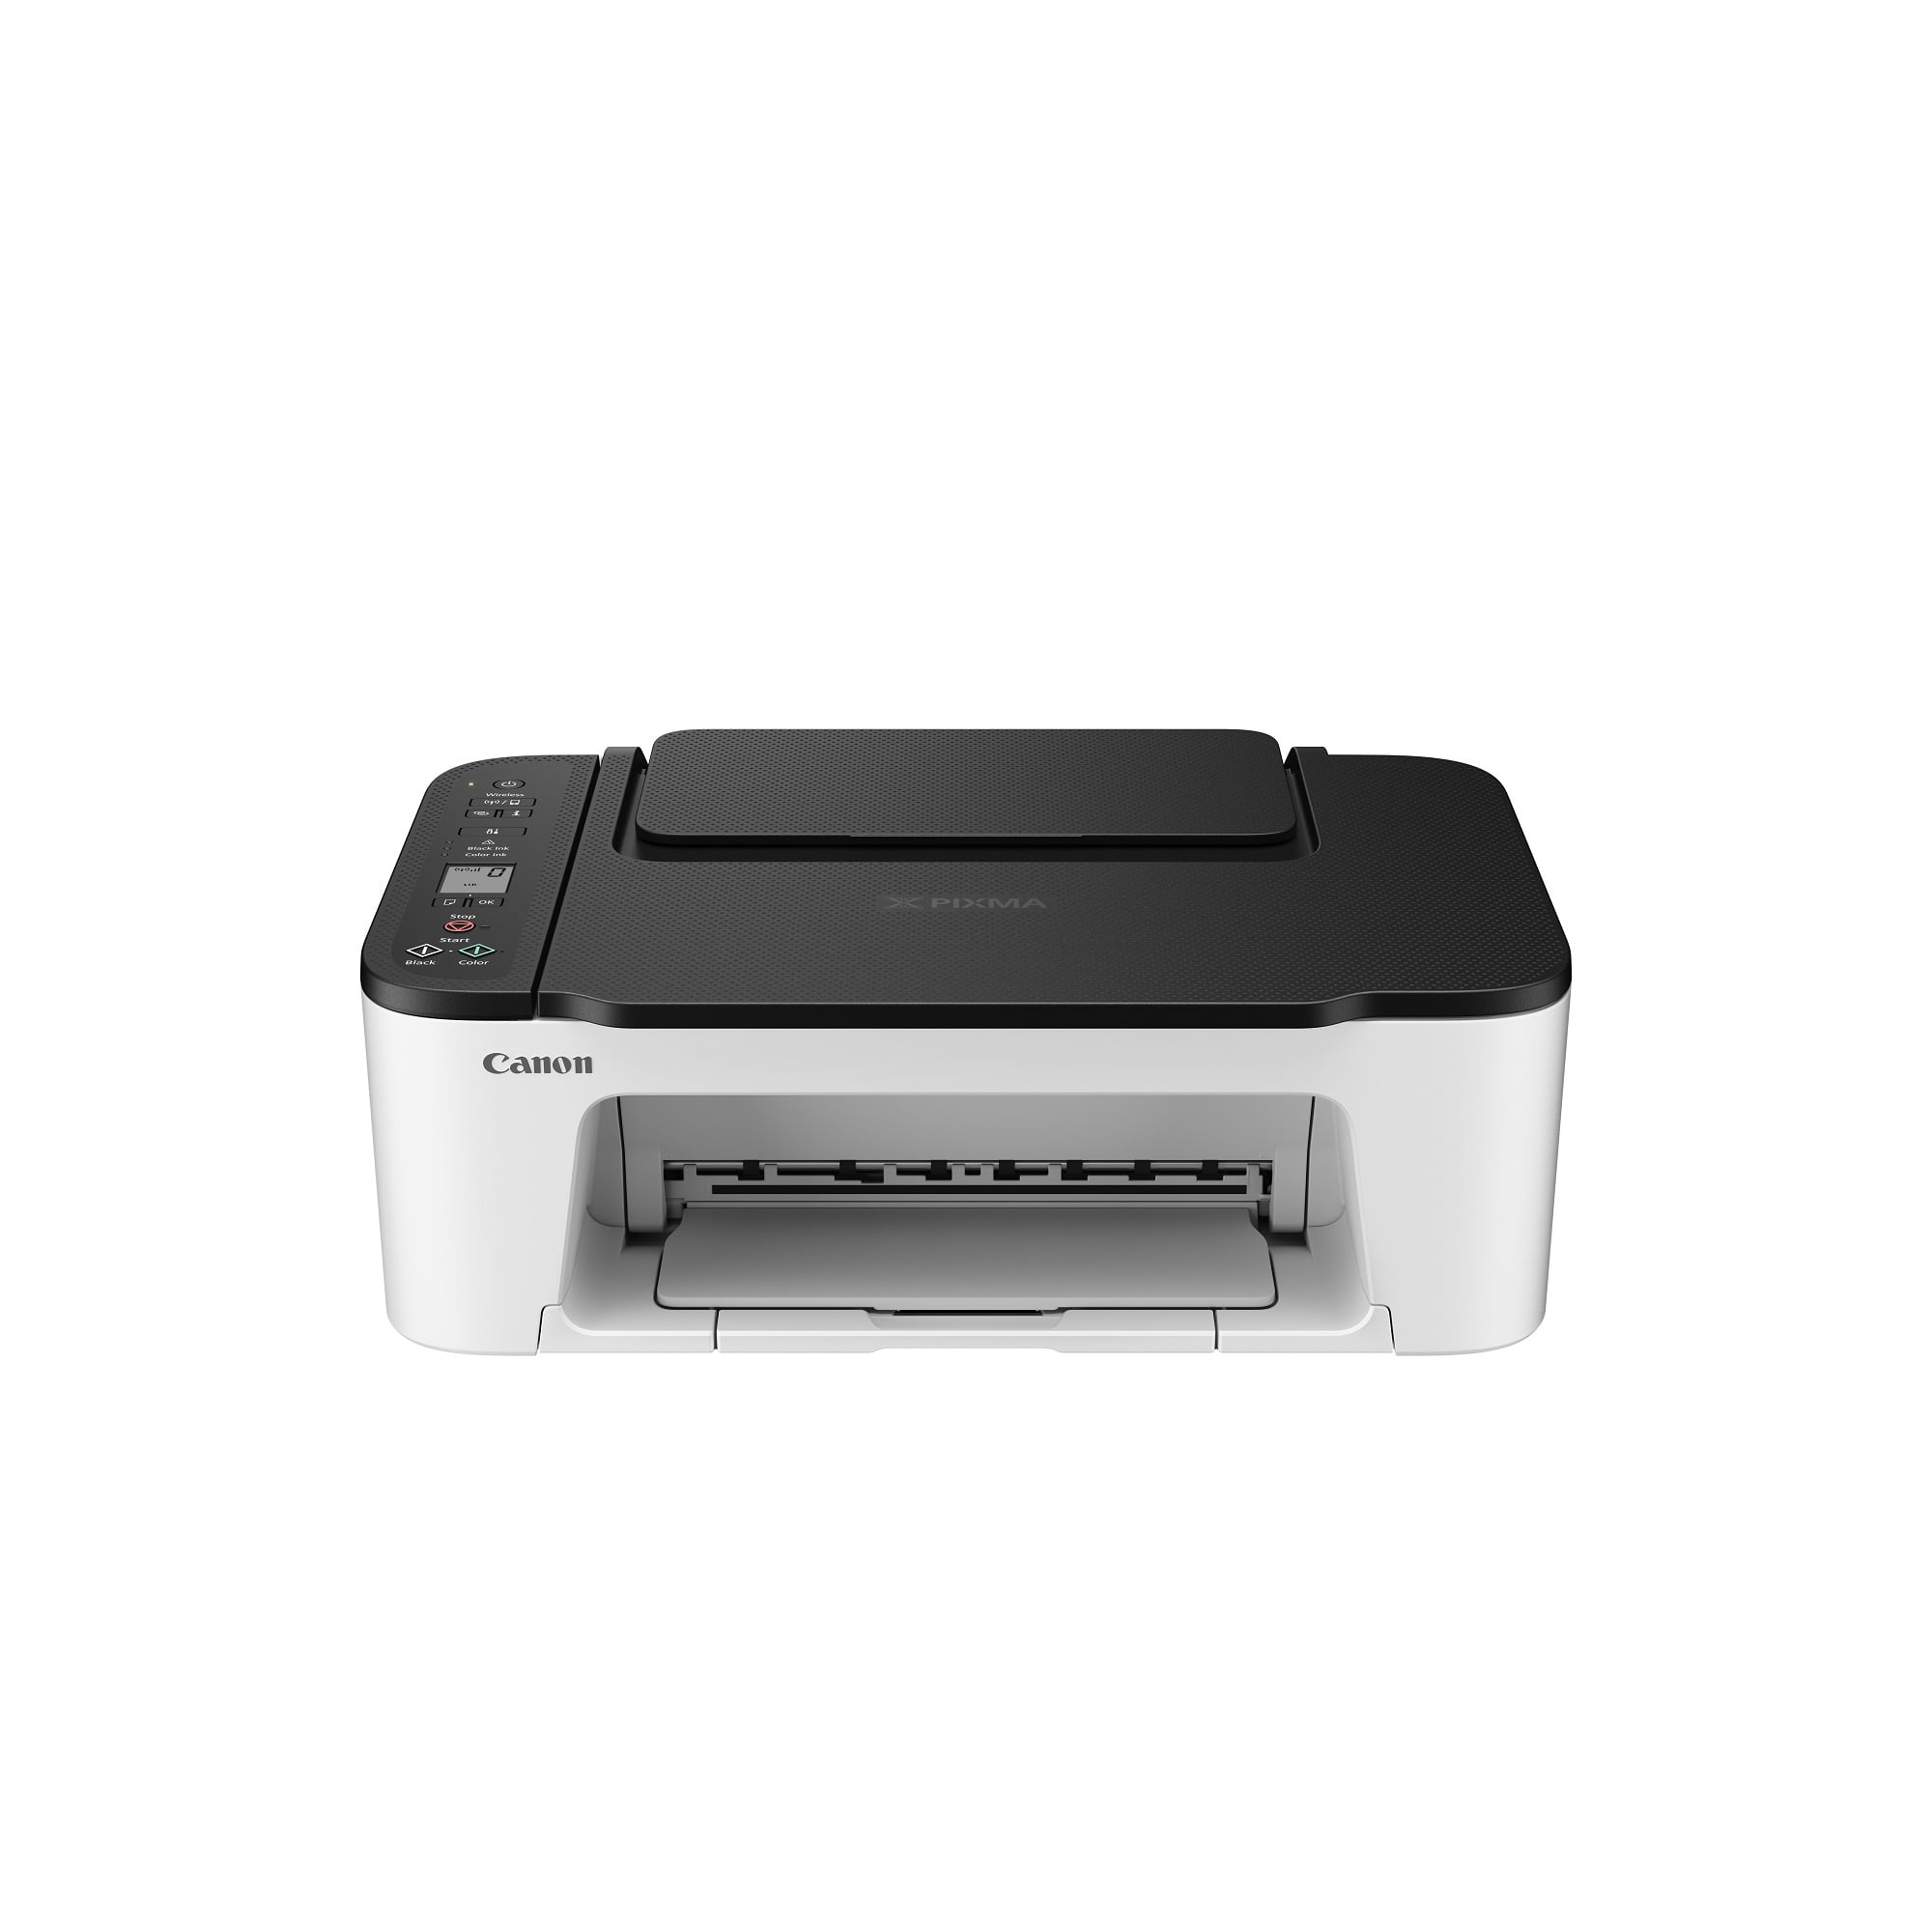 Nøjagtighed opføre sig Taktil sans Canon PIXMA TS3522 All-in-One Wireless InkJet Printer with Print, Copy and  Scan Features - Walmart.com